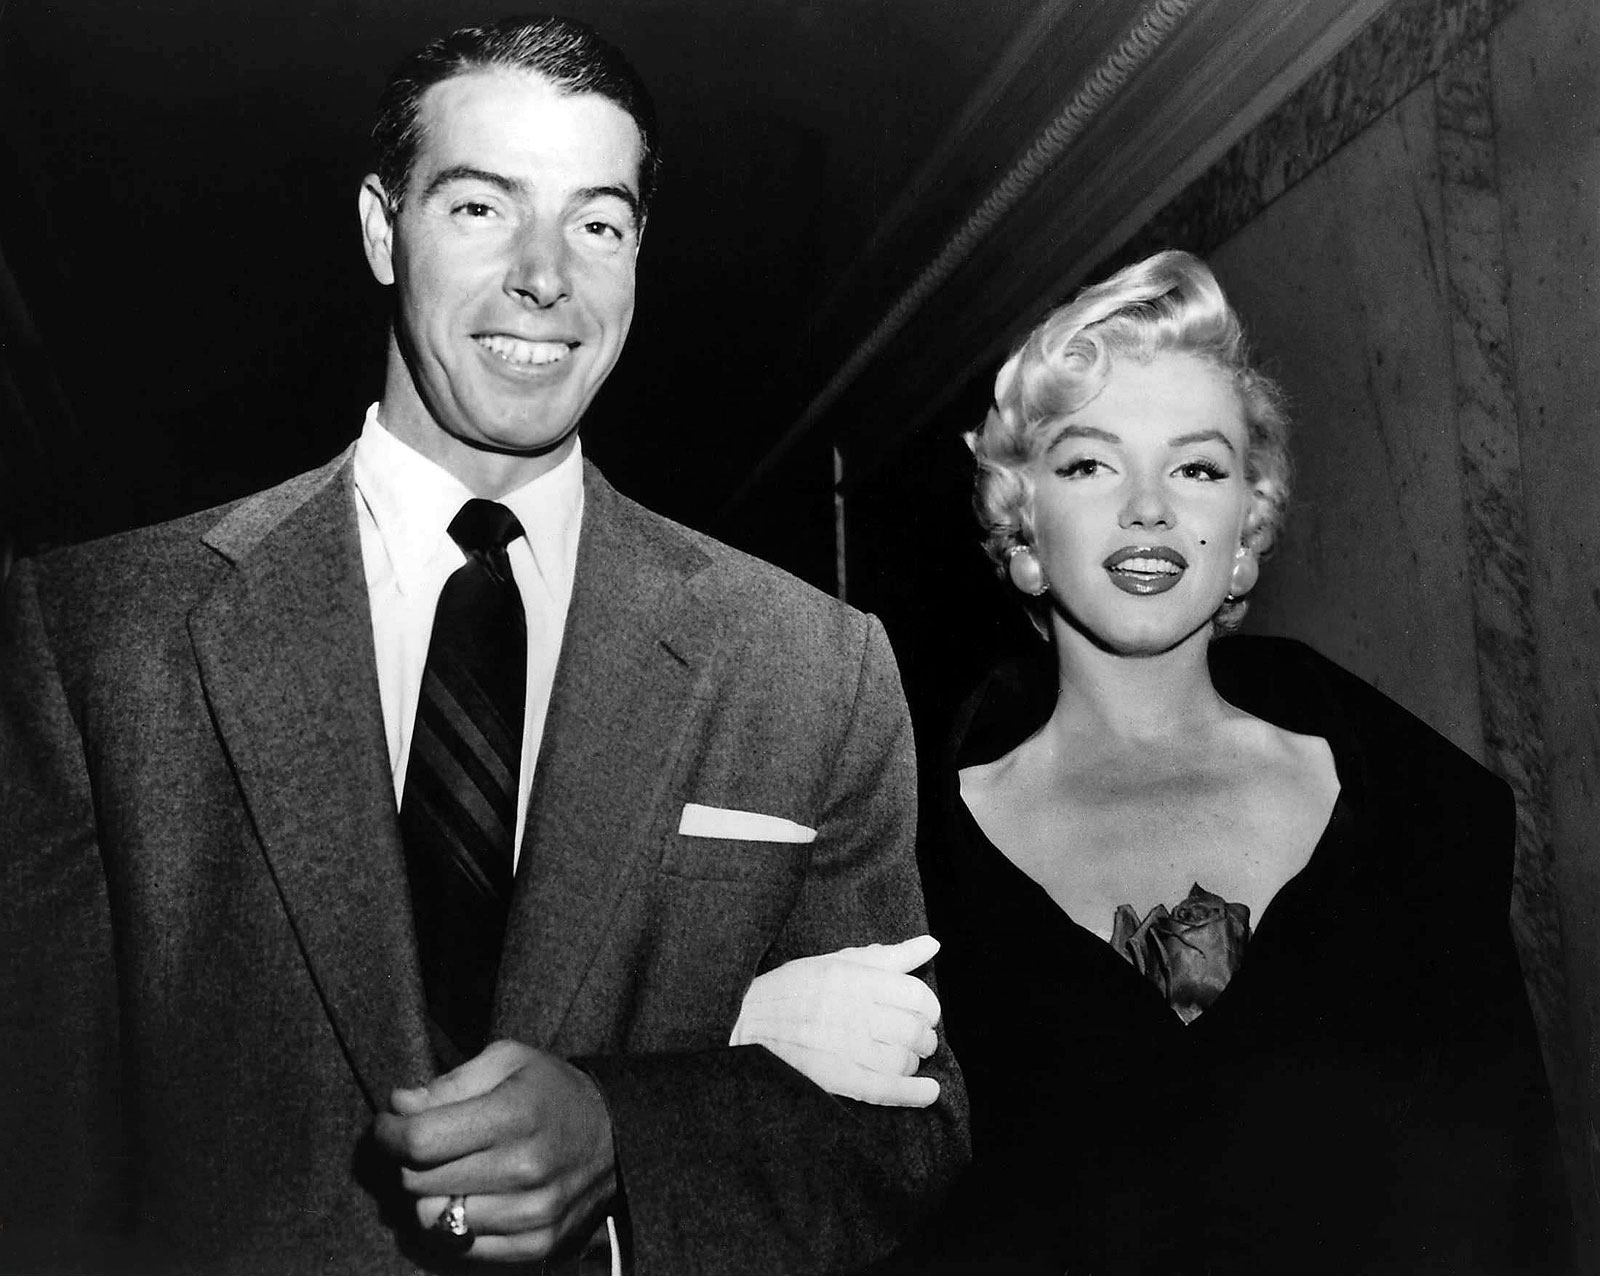 Following Marilyn Monroe’s death, Joe DiMaggio was so devastated he held a private funeral barring all the Hollywood elite, delivered roses to her grave three times a week for over 20 years, never remarried, and his last words were “I’ll finally get to see Marilyn.”